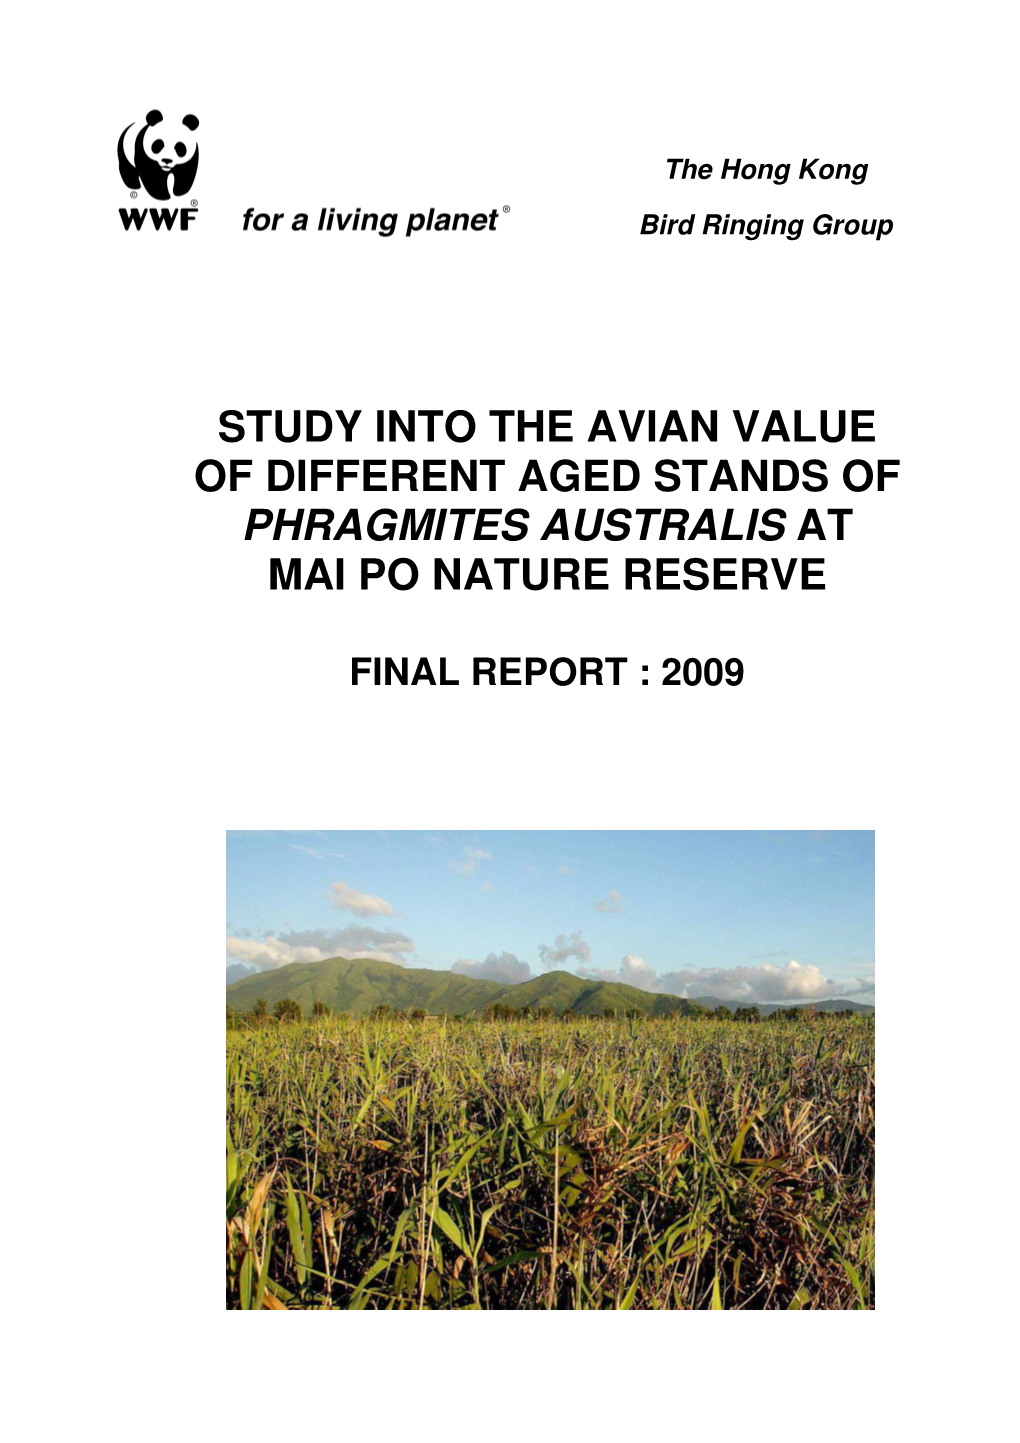 Study Into the Avian Value of Different Aged Stands of Phragmites Australis at Mai Po Nature Reserve